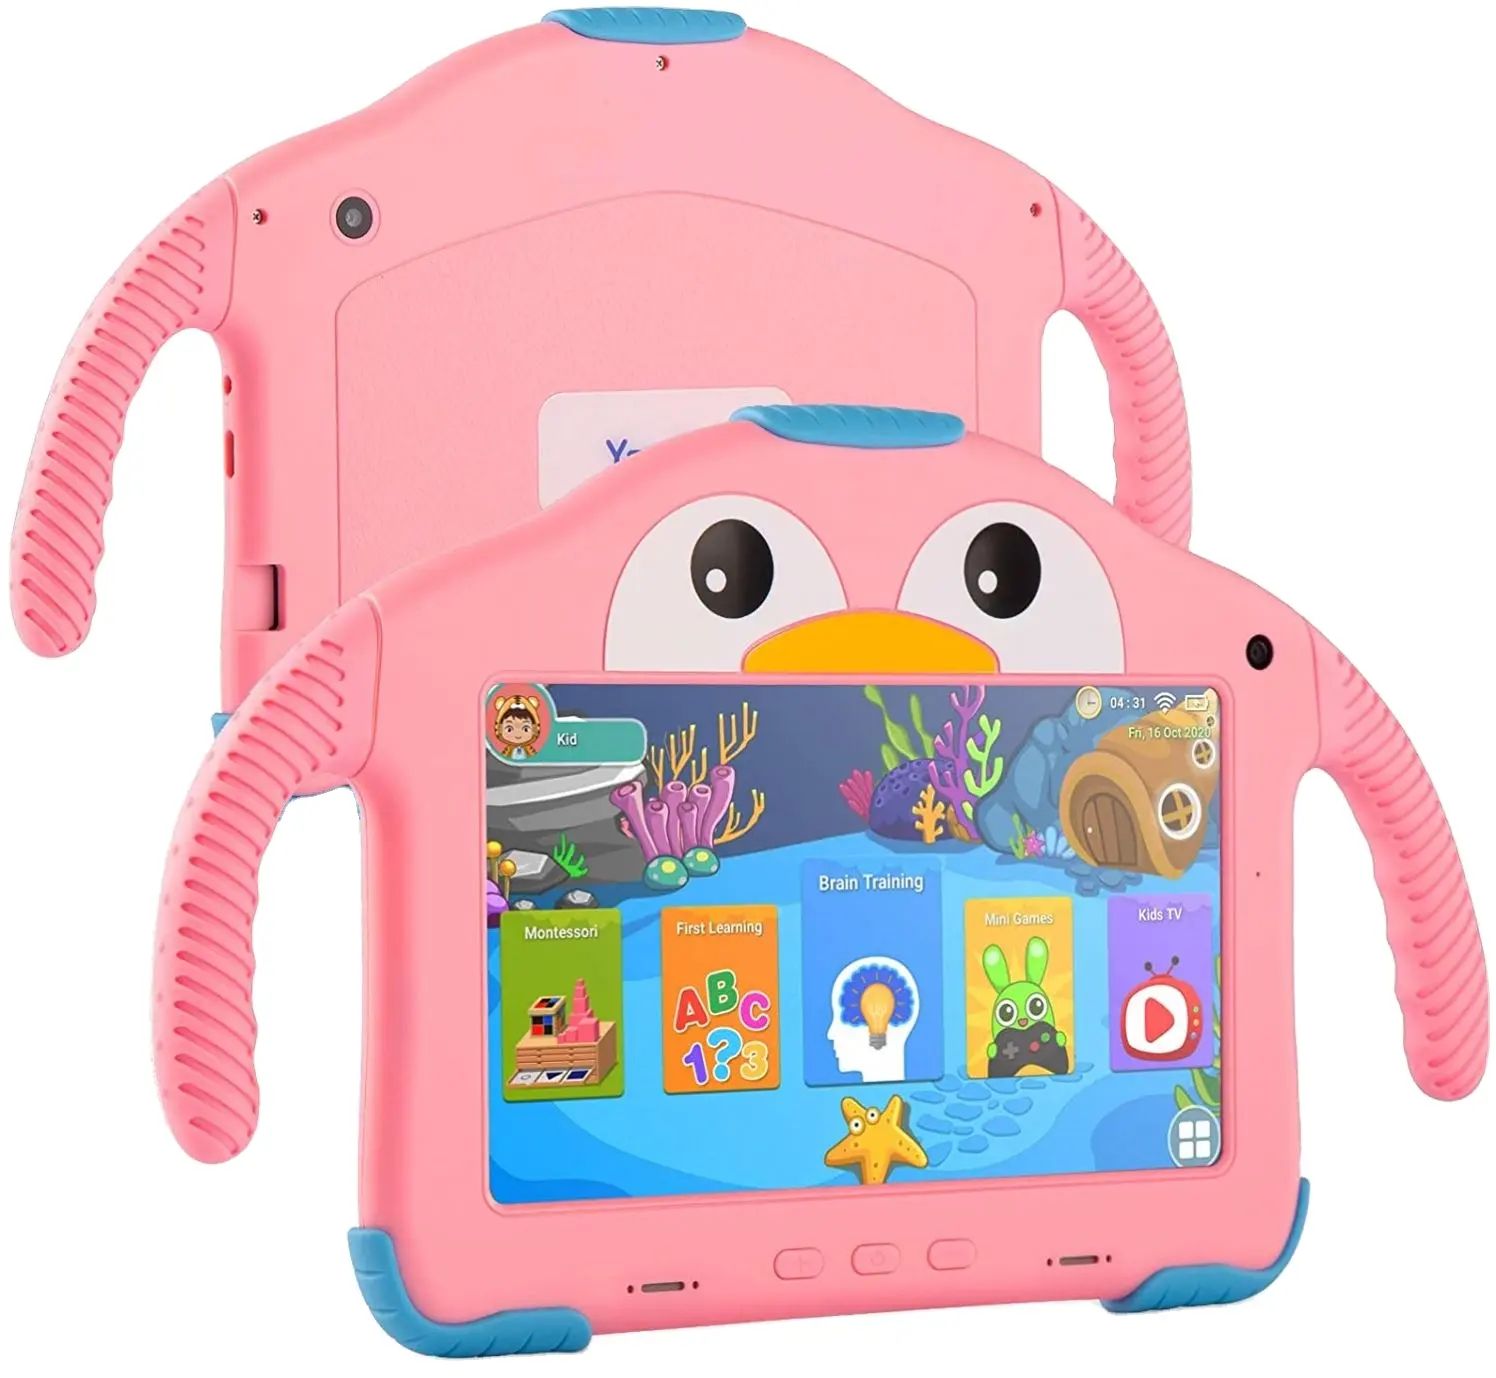 Cheapest oem rk3326 WiFi Model 7' kid learning APP pre-Installed Quad-Core tablet Android tablet for Education kids tablet pc